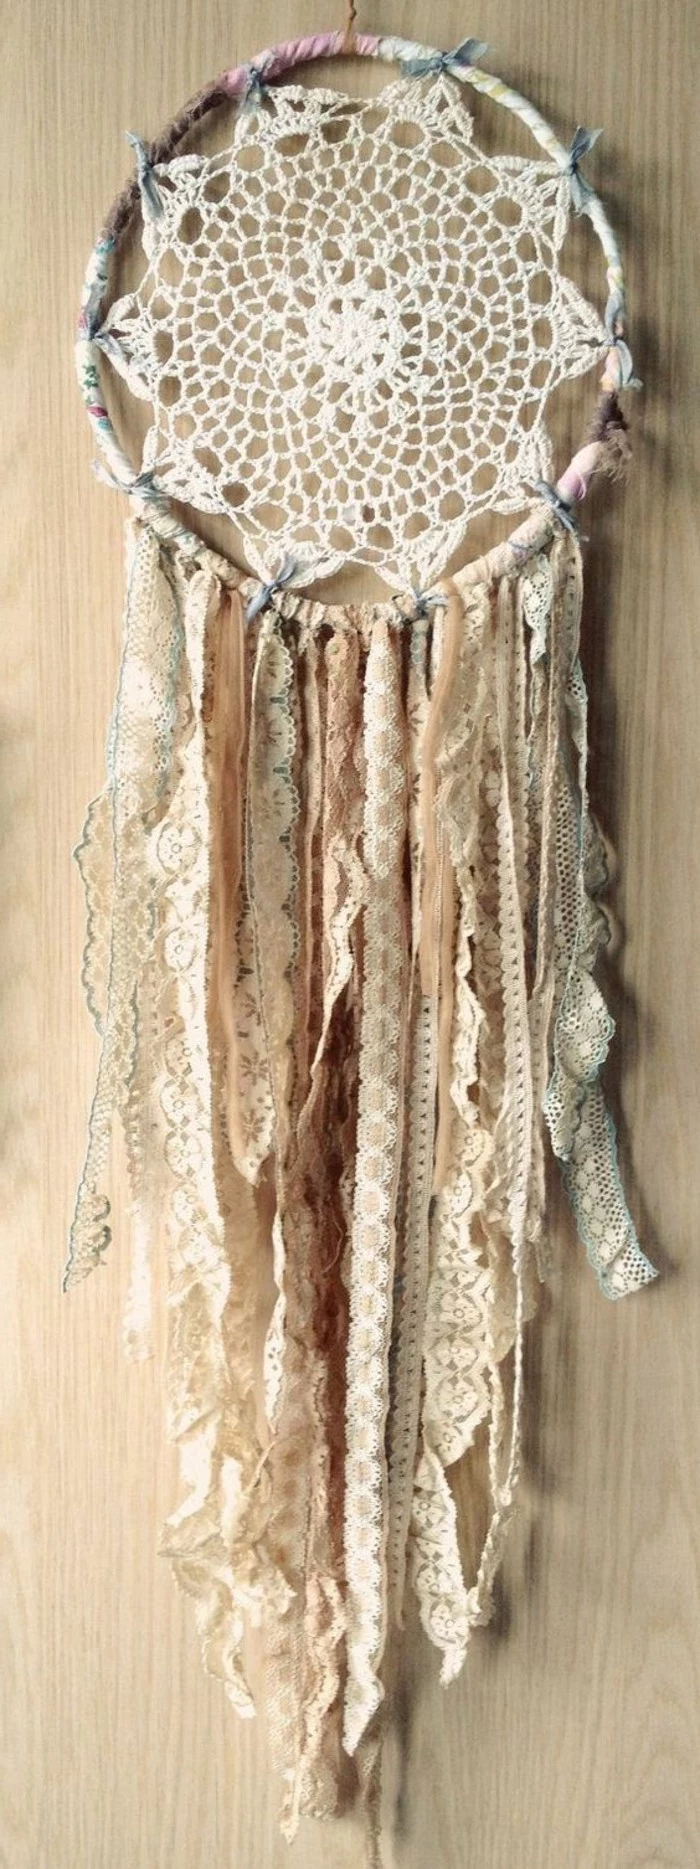 antique lace ribbons, in pale beige, cream and off white, attached to a boho dreamcatcher, with a crocheted doily, pictures of dream catchers, pale beige wooden background 